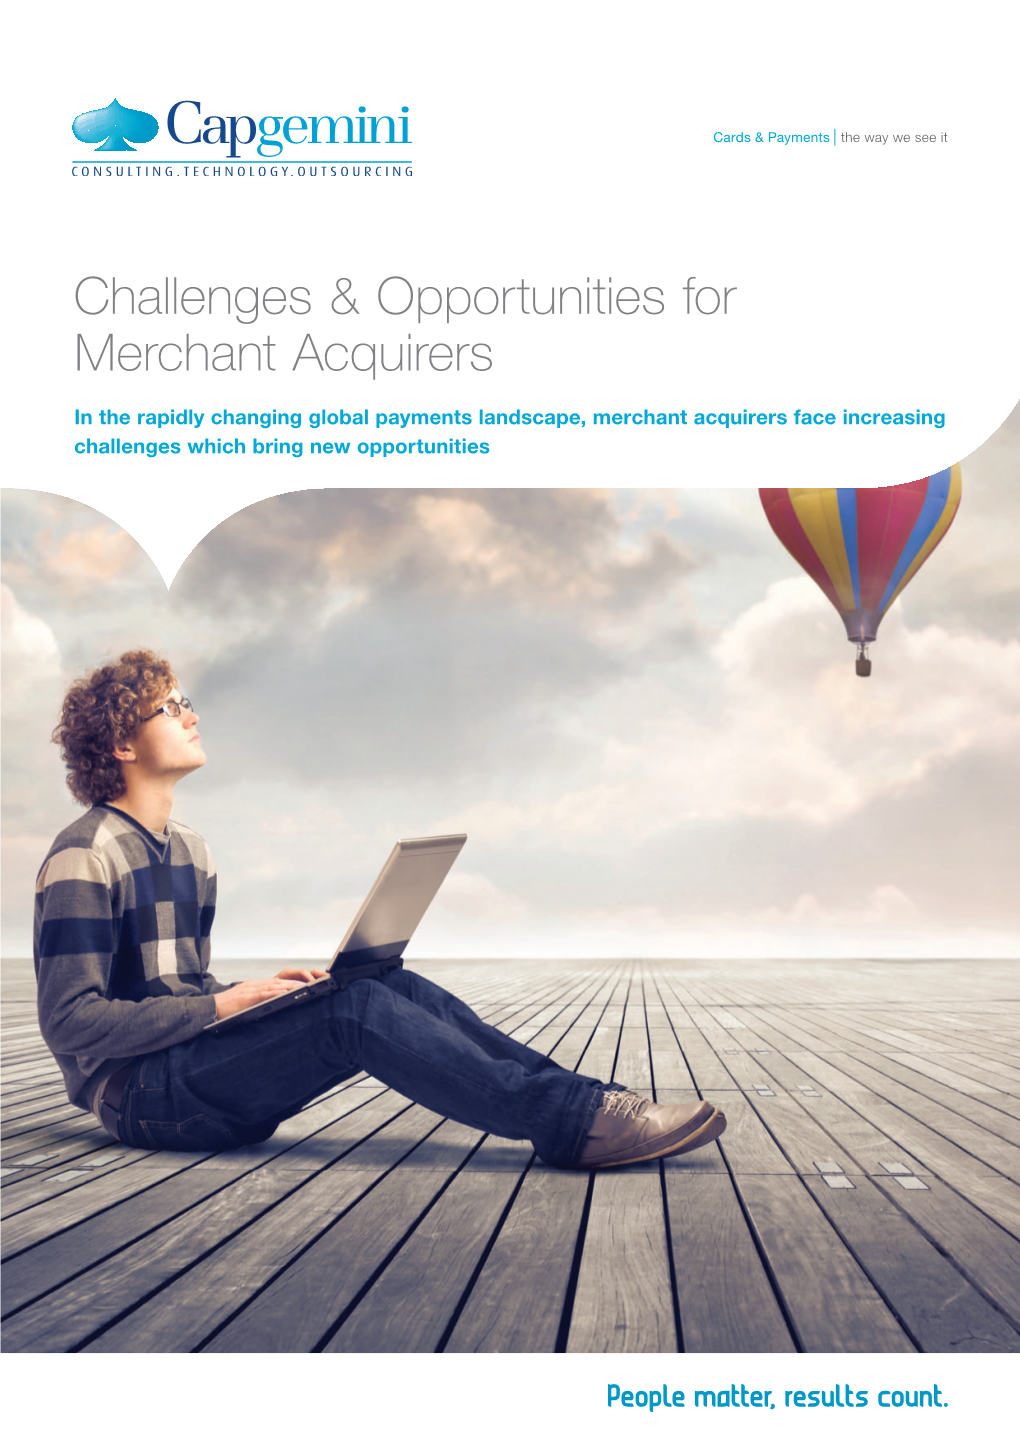 Challenges & Opportunities for Merchant Acquirers